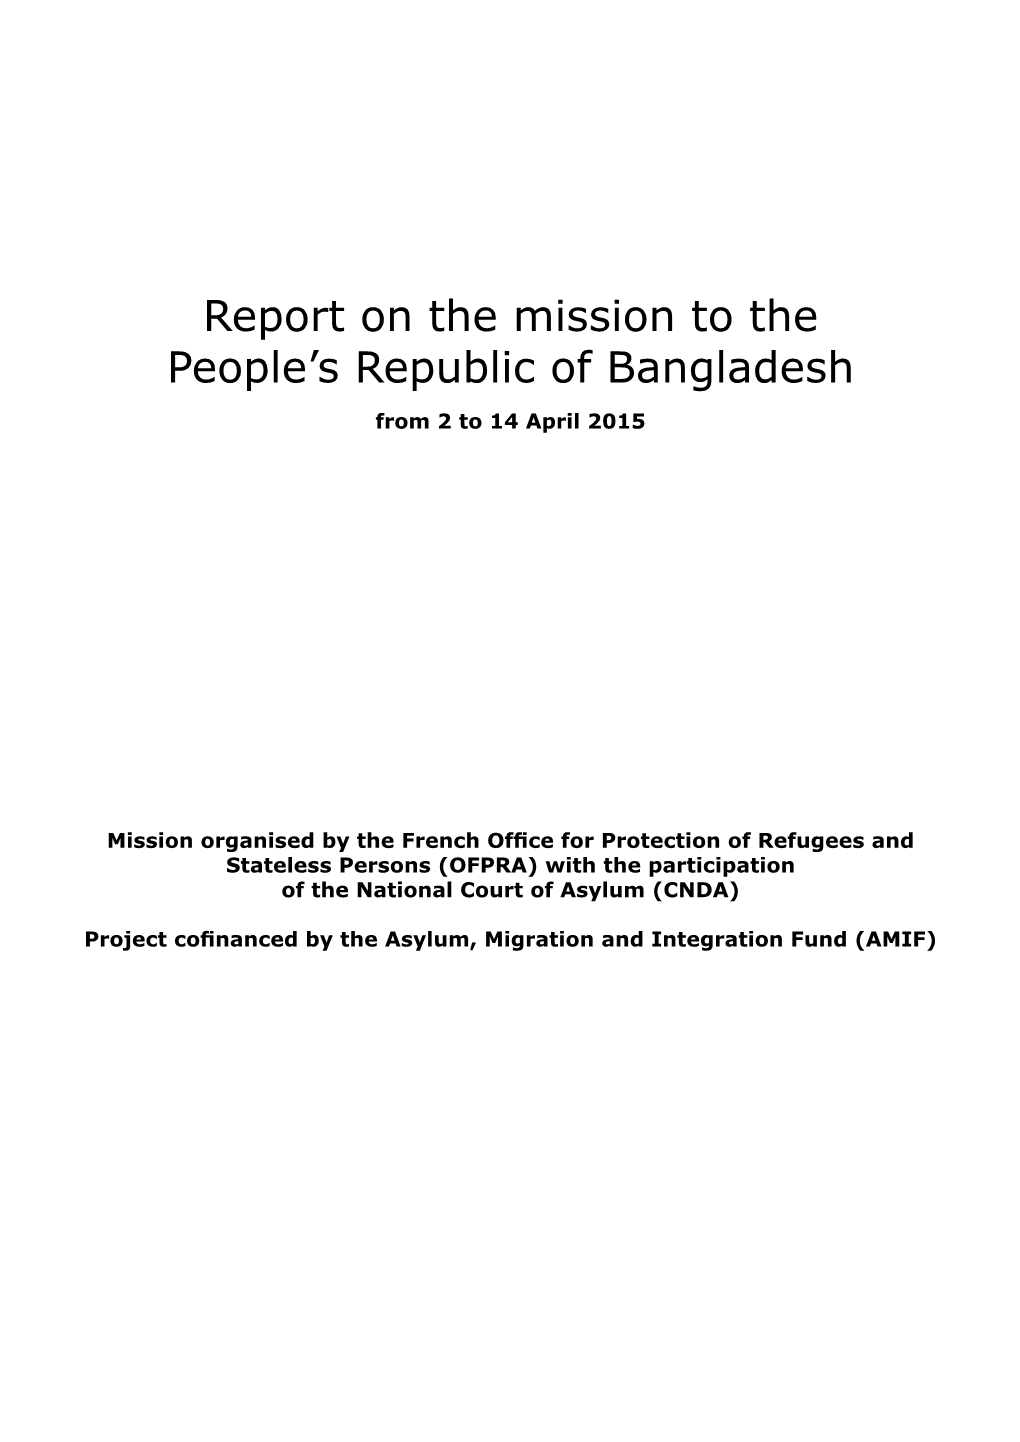 Report on the Mission to the People's Republic of Bangladesh